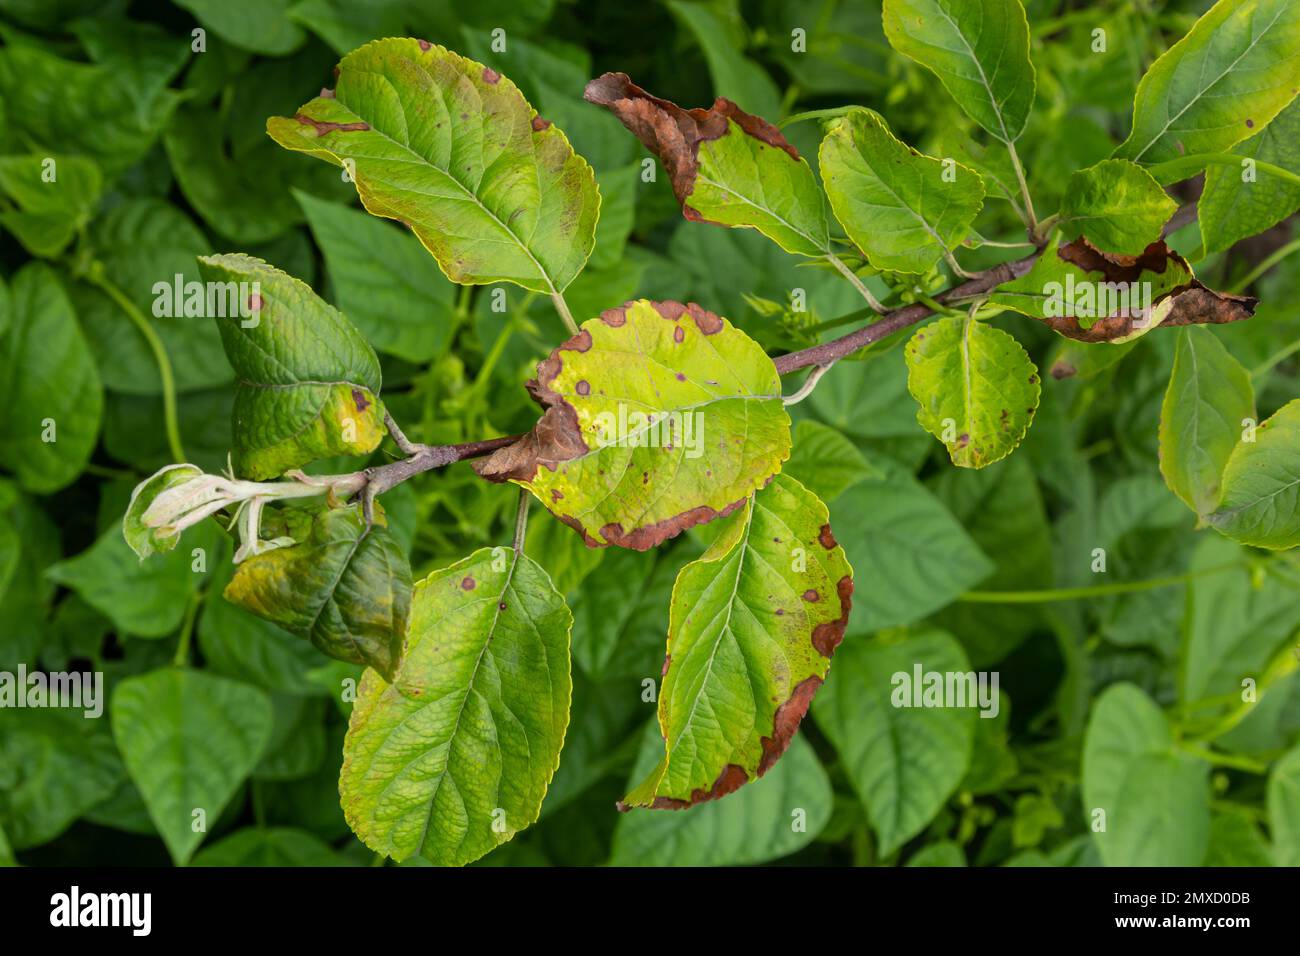 Rosy leaf-curling apple aphids, Dysaphis devecta, apple tree pest. Detail of affected leaf. Stock Photo